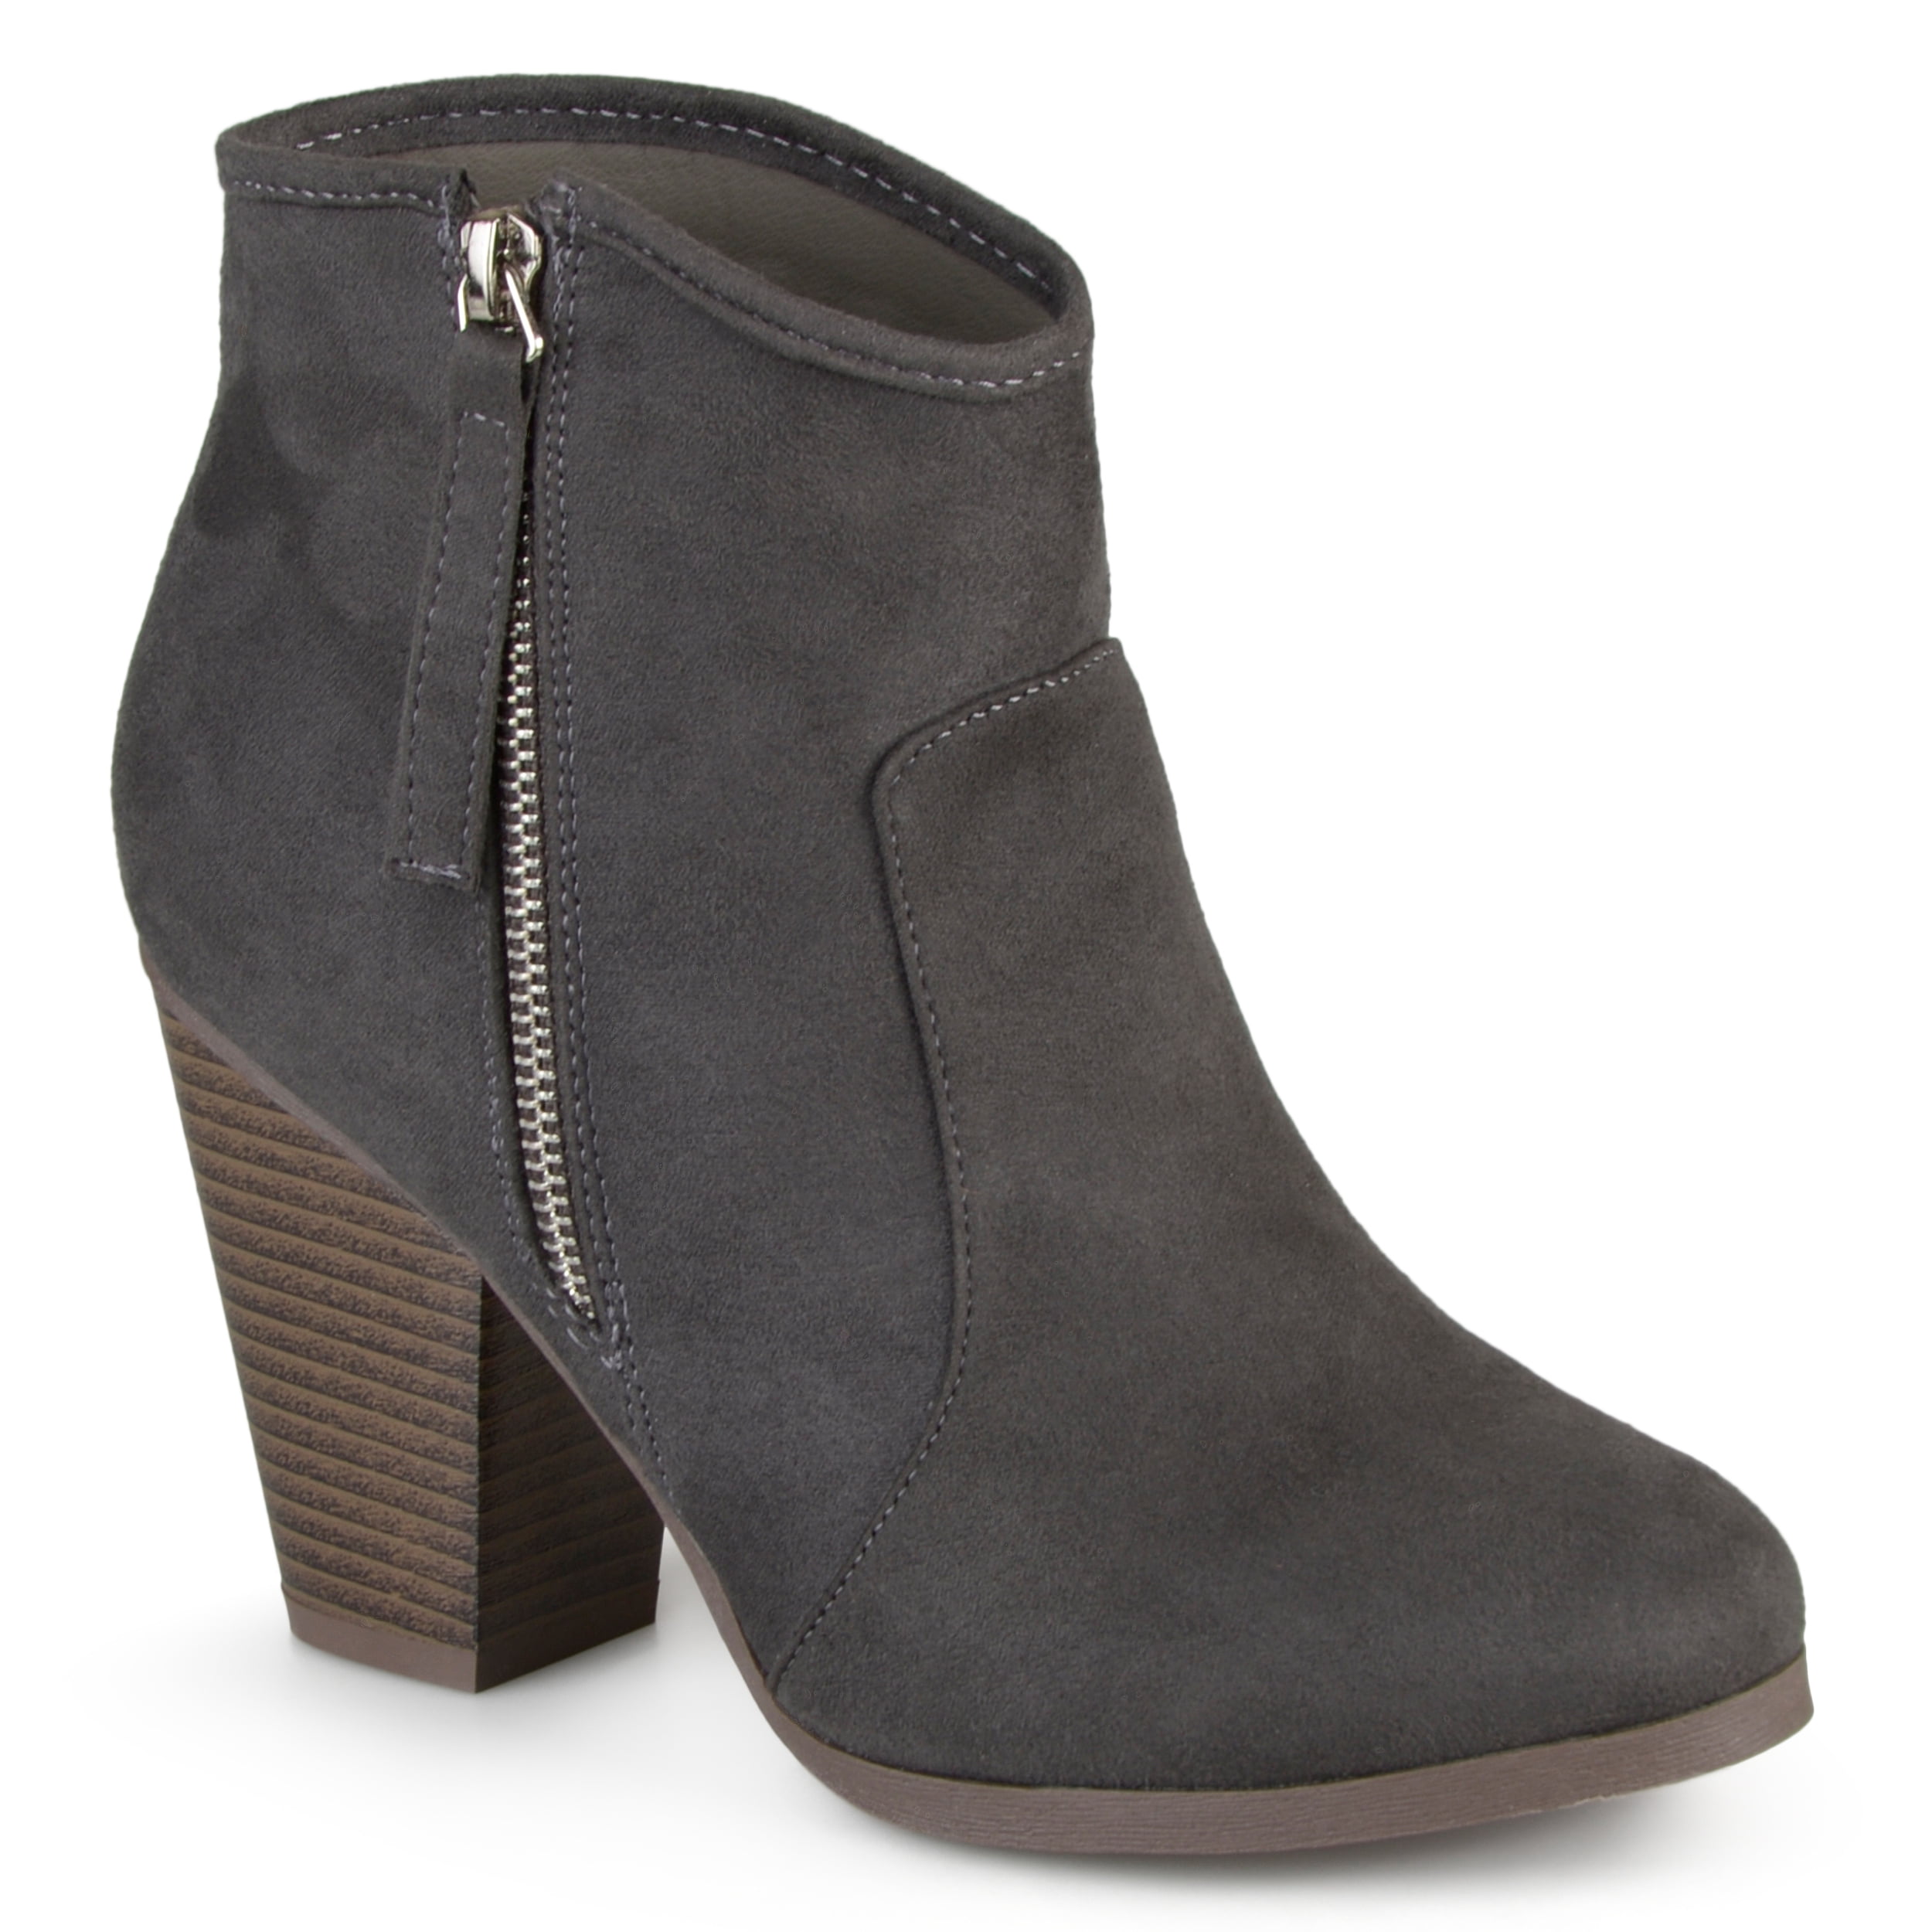 Details about   New Women's Fashion Ankle Boots Wedge Heel Round Toe Casual Suede Fabric Boots D